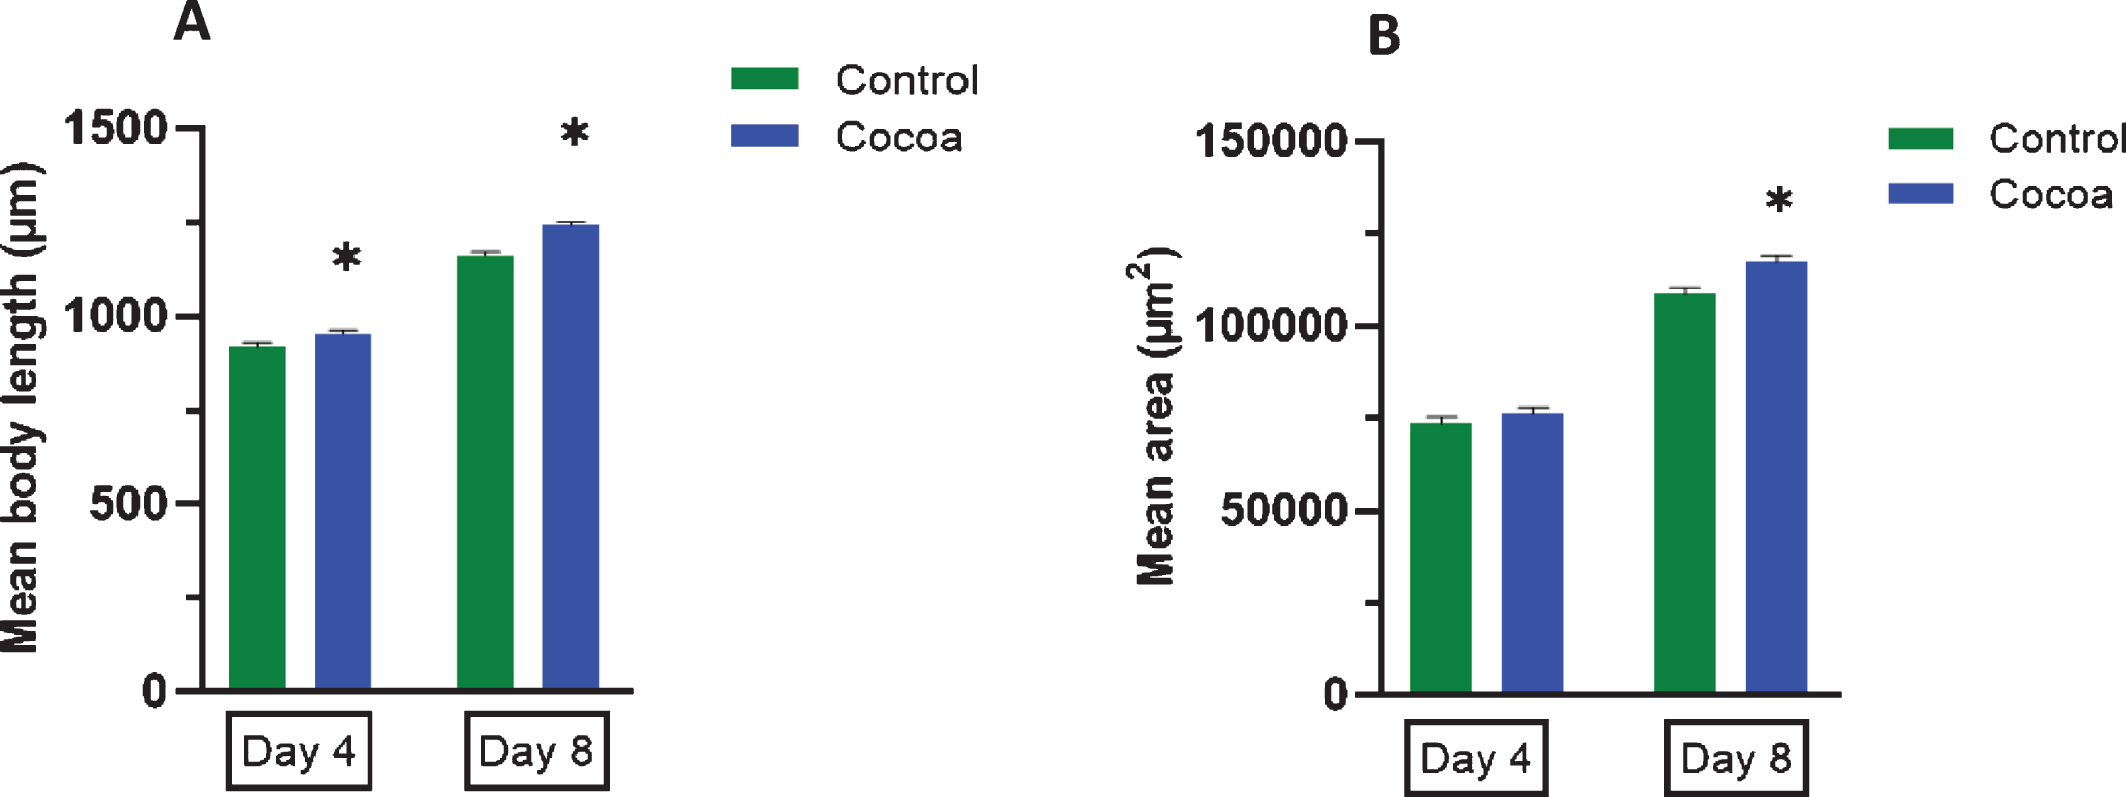 Body length (μm) and area (μm2) of control and cocoa-supplemented wild type (N2) C. elegans. Body length (μm) and area (μm2) were measured at two different time points as day 4 (1st day of adulthood) and day 8 (5th day of adulthood). Experiments were performed in triplicate. Values are expressed in mean±SEM (n = 52 for control at both day 4 and 8 and n = 53 for cocoa at both day 4 and 8). *P < 0.05 for the indicated comparison (calculated using multivariate test, general linear model). (A) Cocoa supplemented worms were significantly longer than control worms at both day 4 and day 8 (P < 0.05). (B) Cocoa-supplemented worms were significantly thicker than control worms at day 8 as indicated by the mean area (P < 0.05).